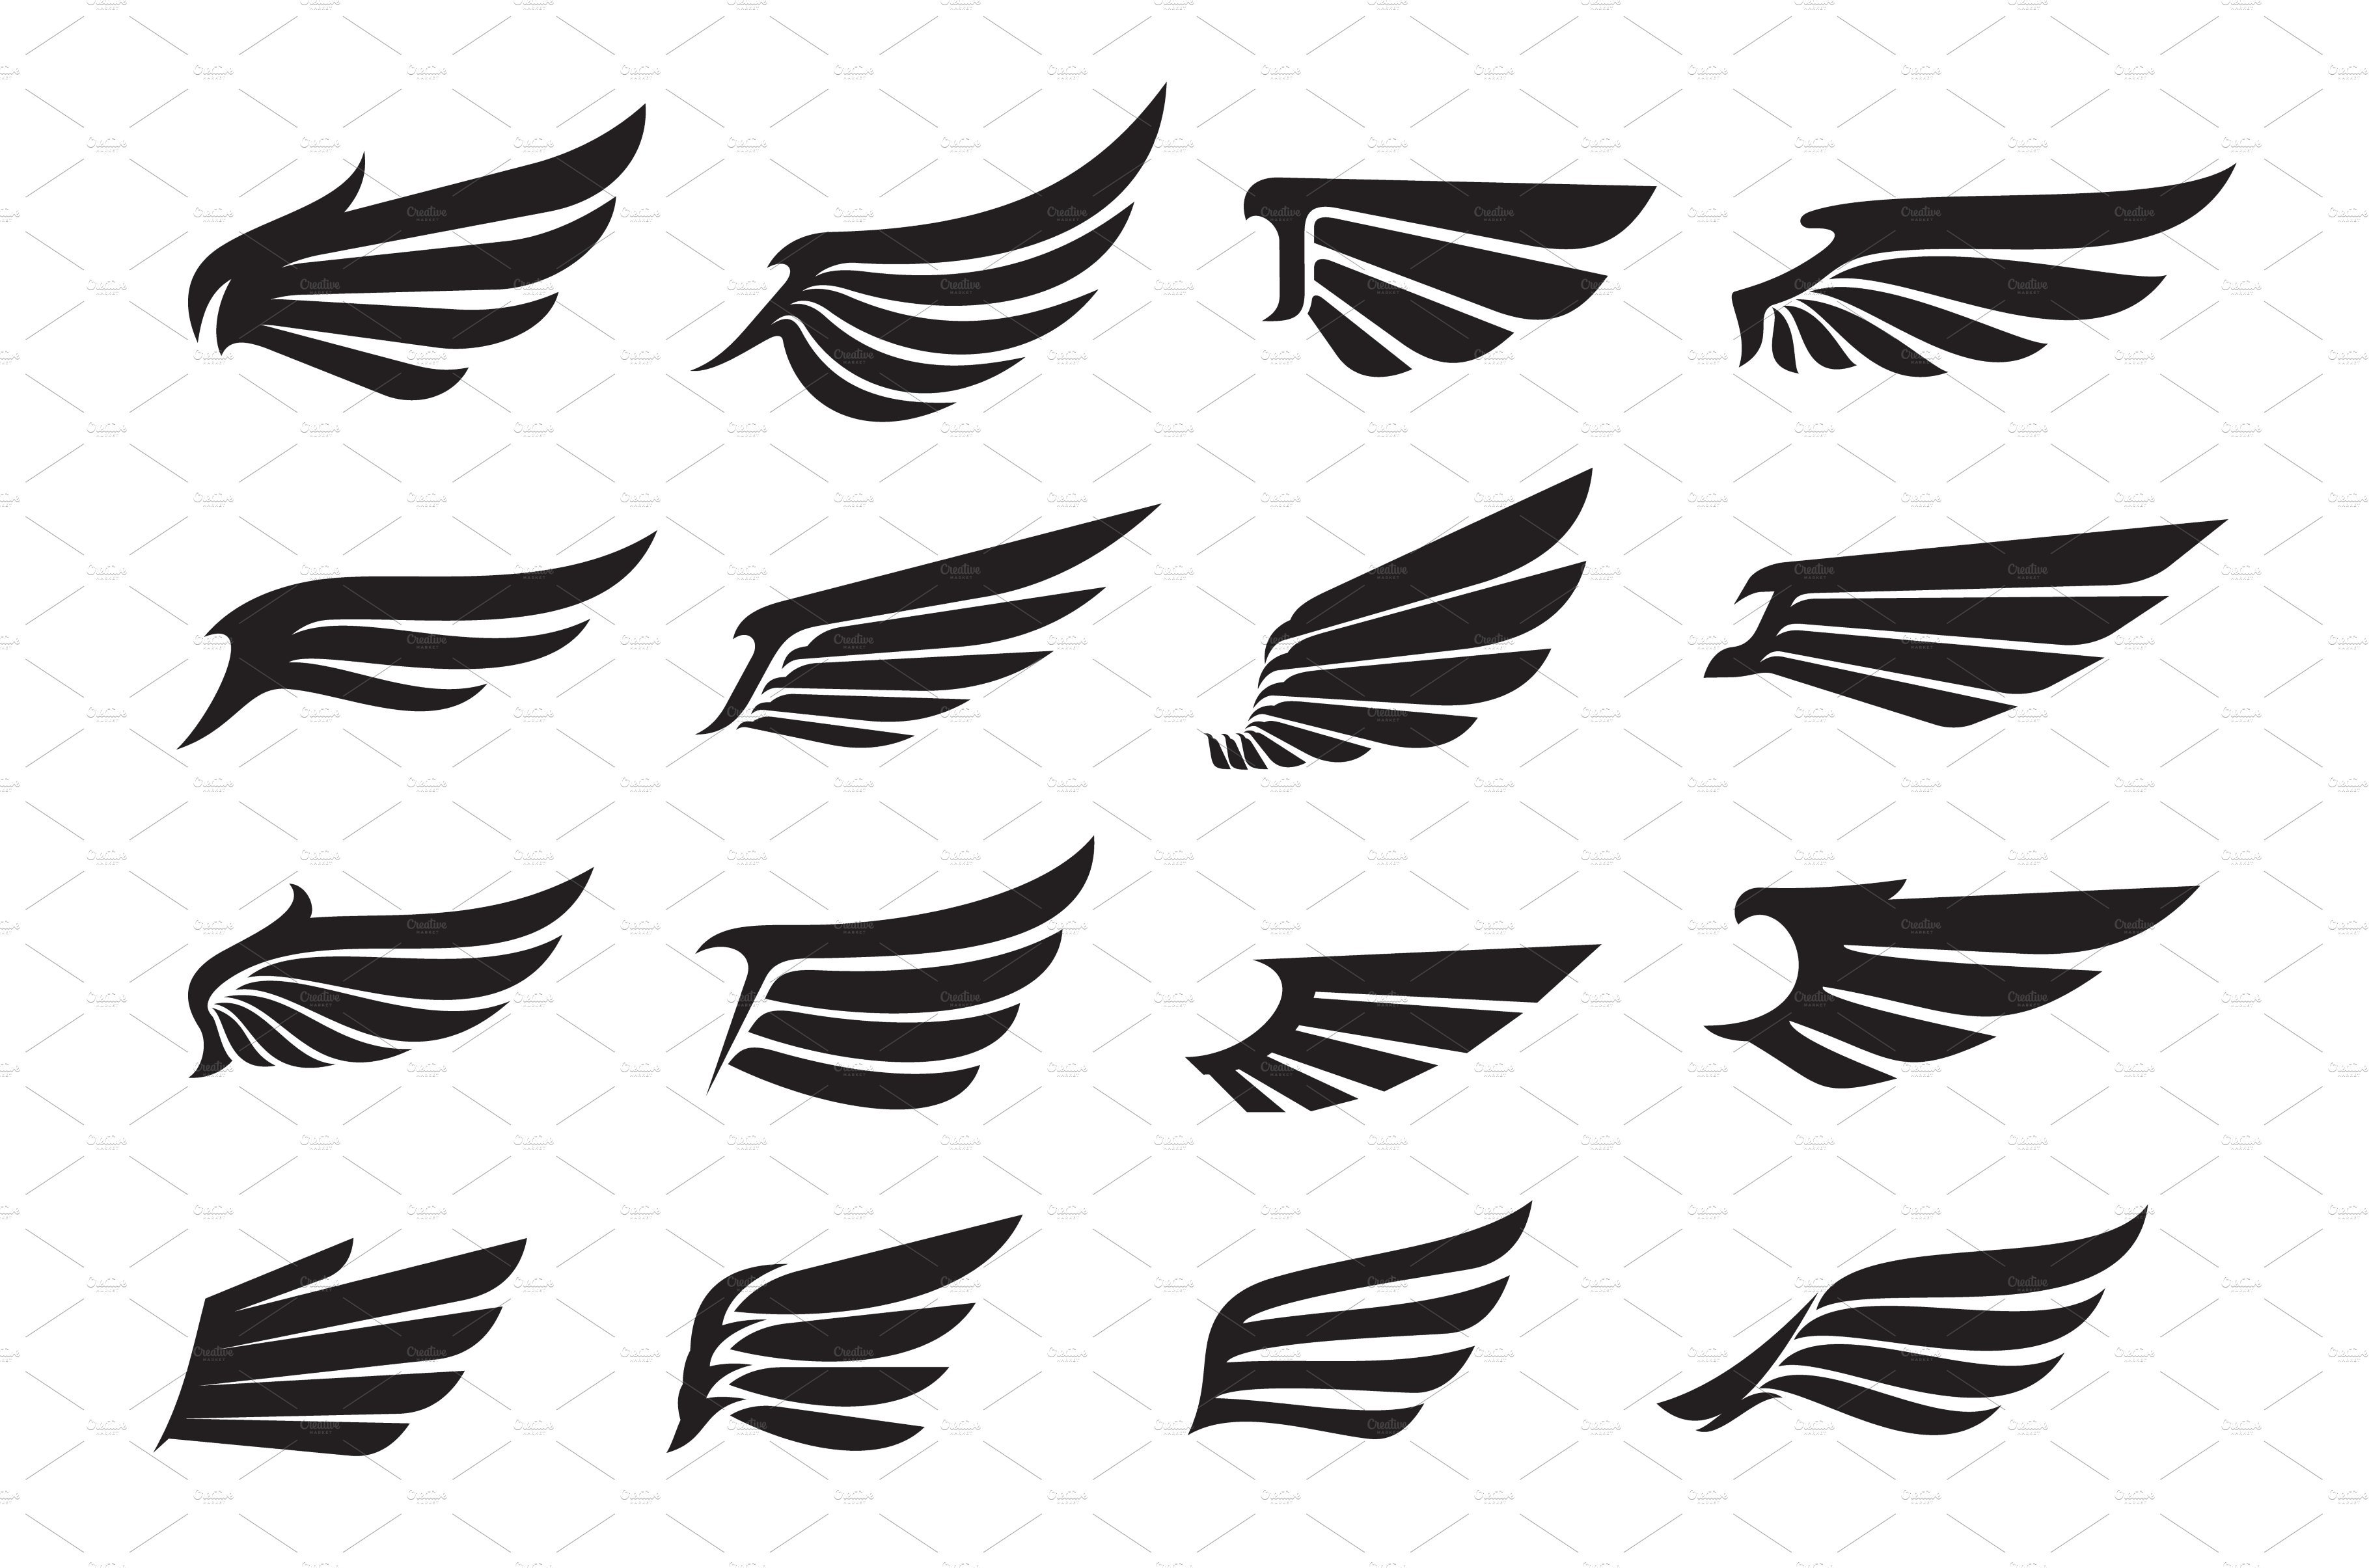 Eagle wing icons, angel wings cover image.